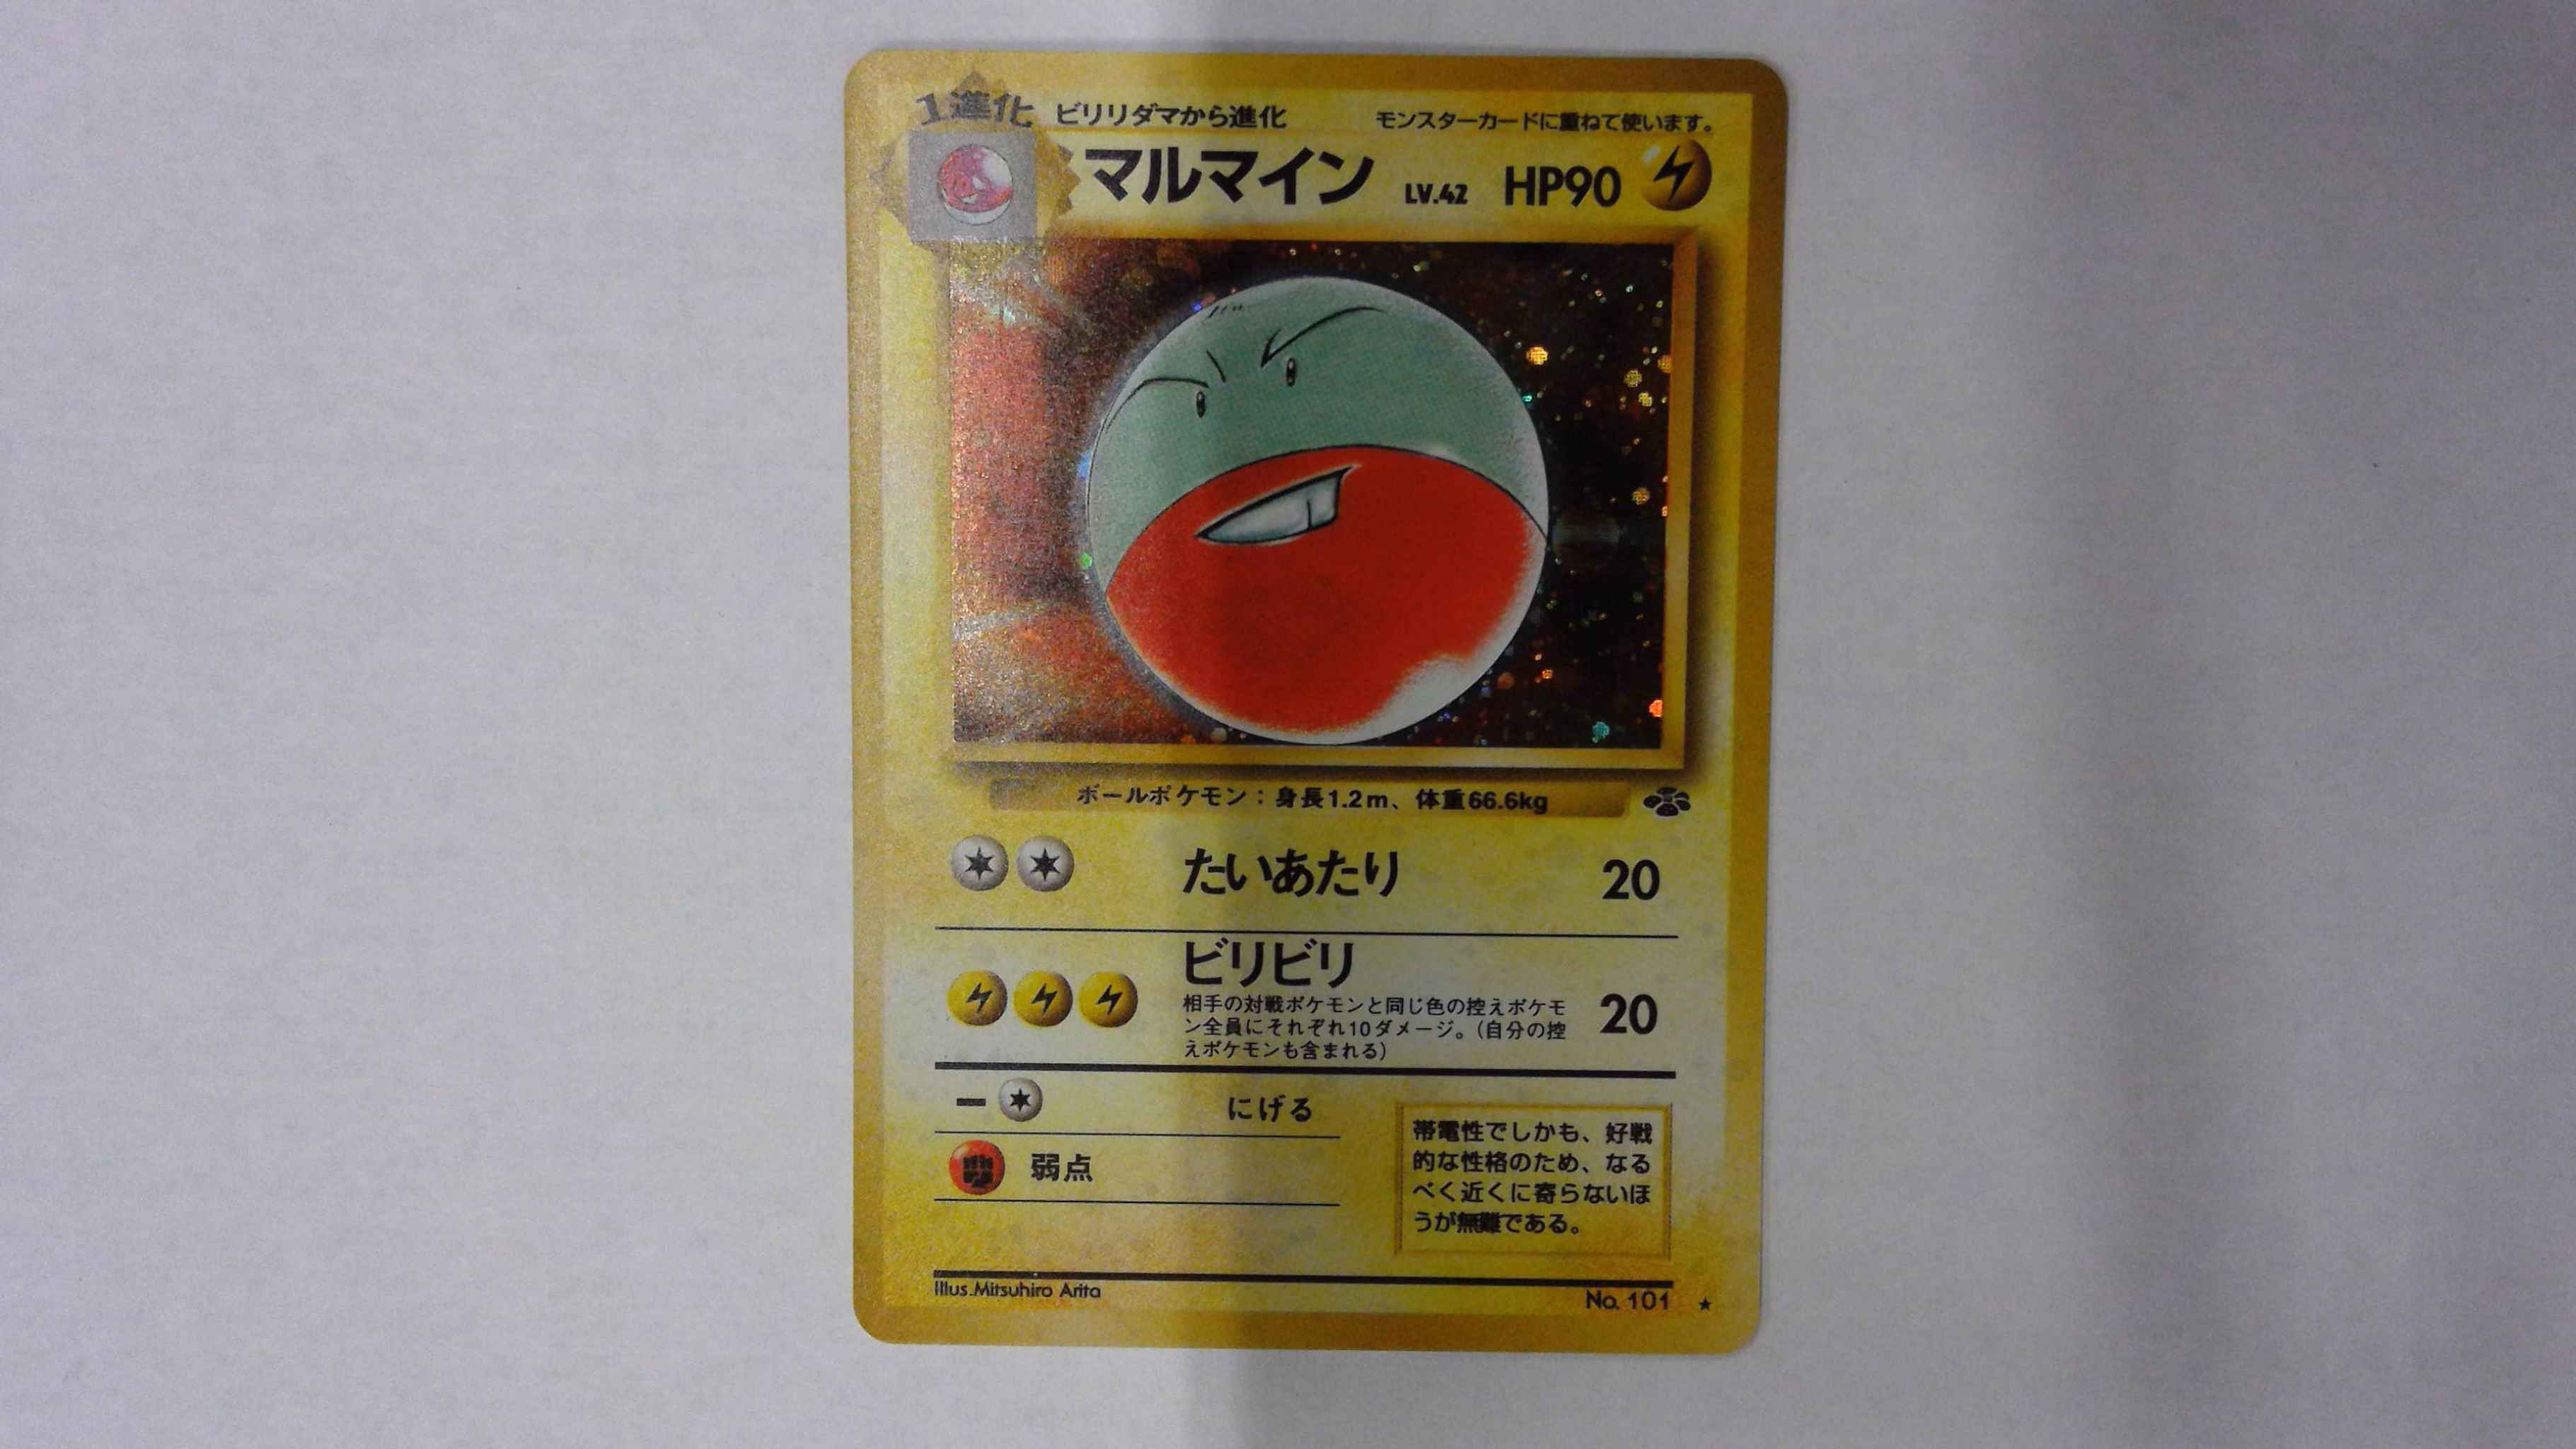 Electrode Foil Japanese Electrode 2 Jungle Pokemon Online Gaming Store For Cards Miniatures Singles Packs Booster Boxes